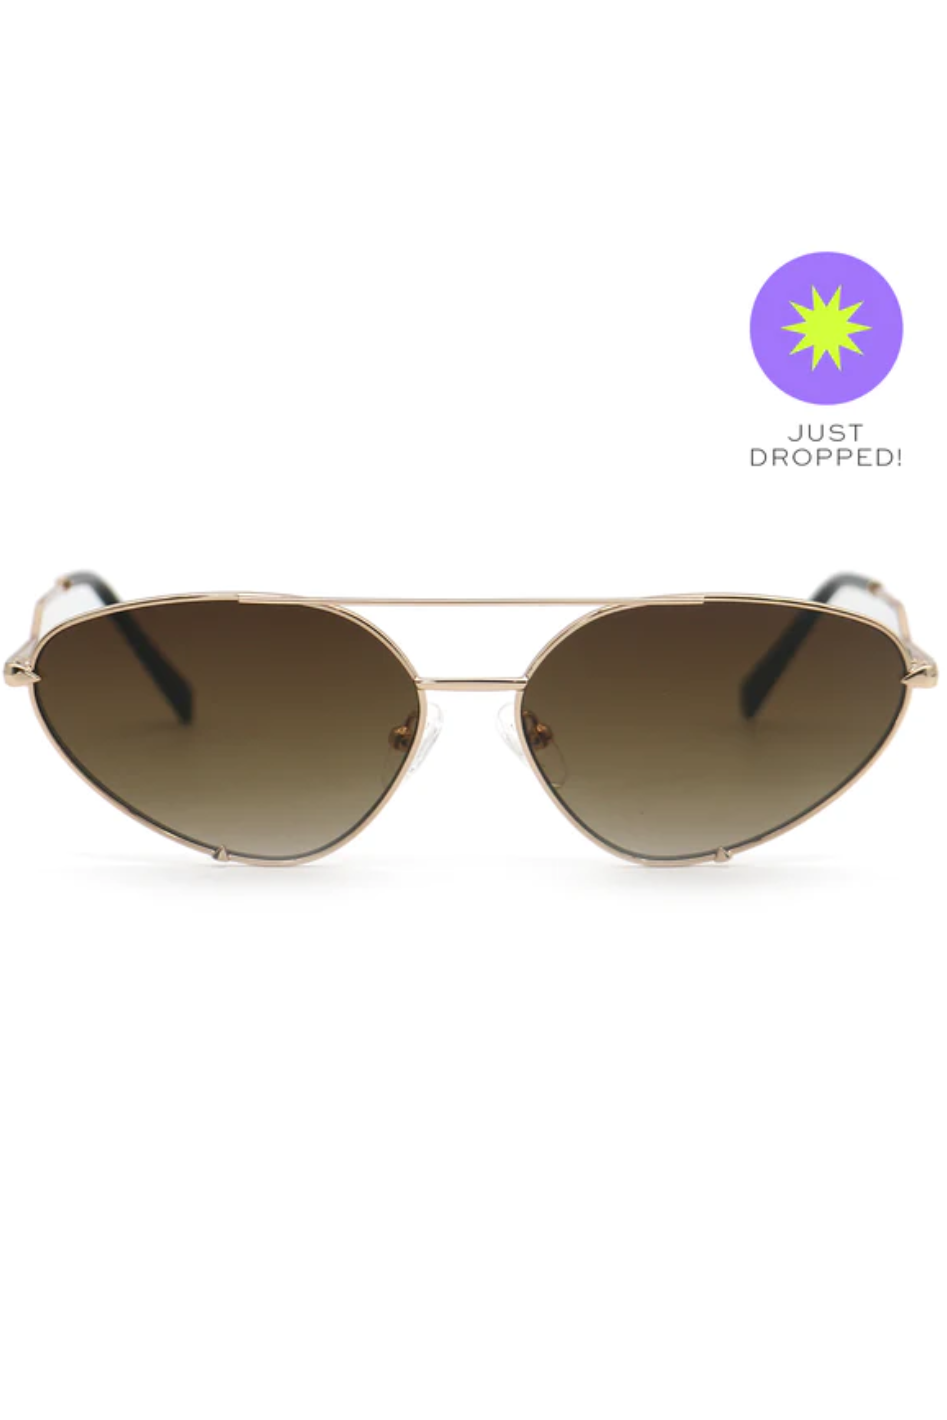 Lucky Star Vintage Aviator Sunglasses - Faded Brown - Expressive Collective CO.